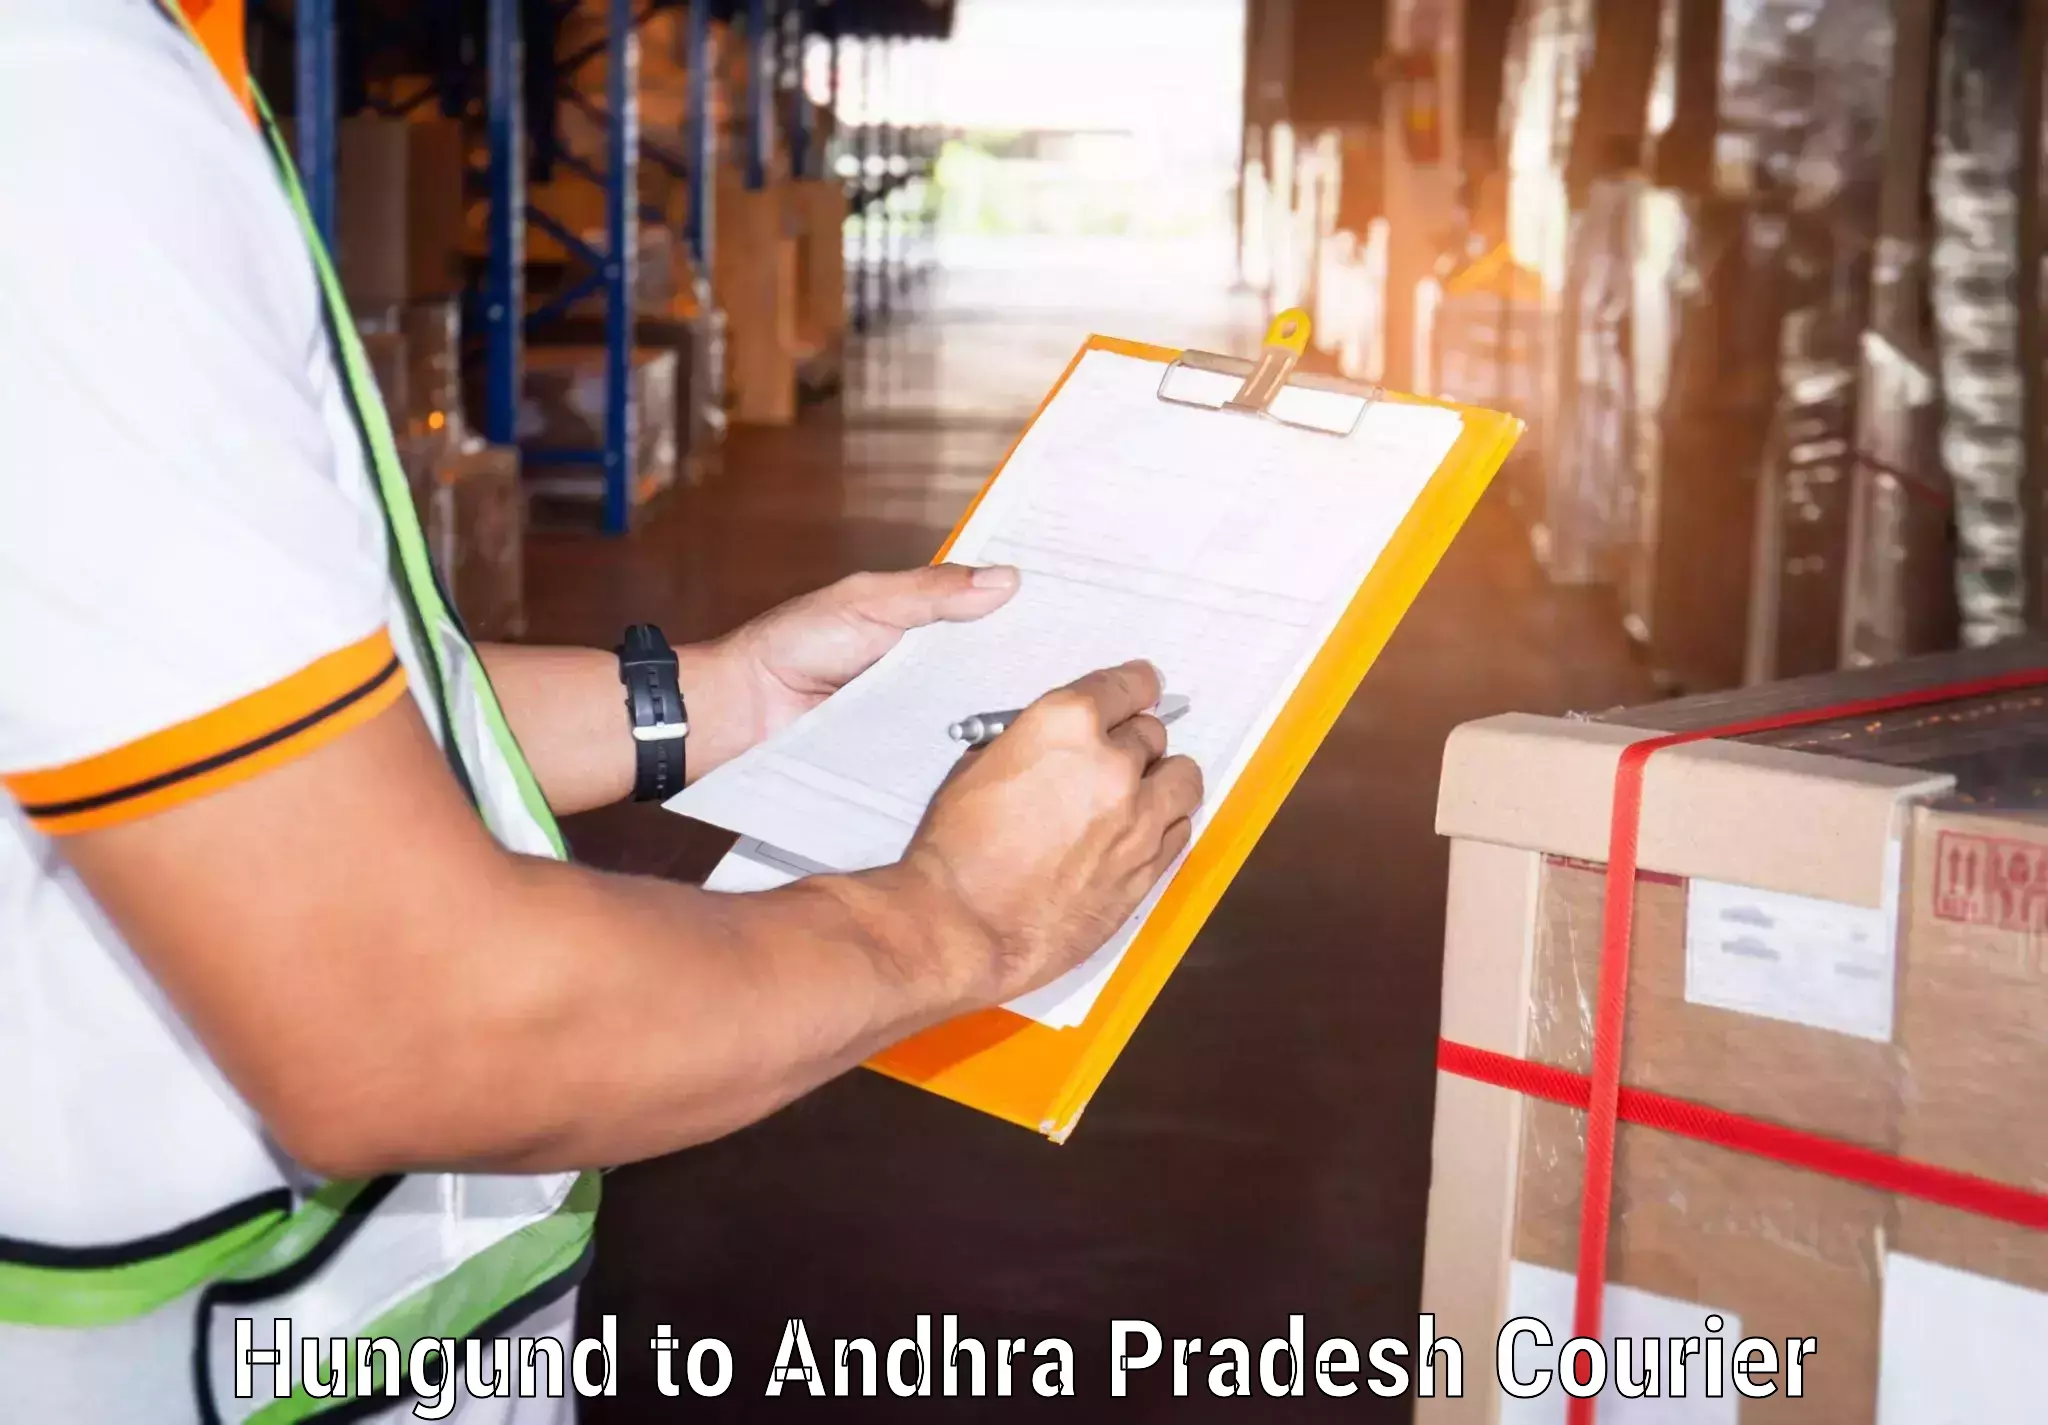 High-priority parcel service in Hungund to Kurnool